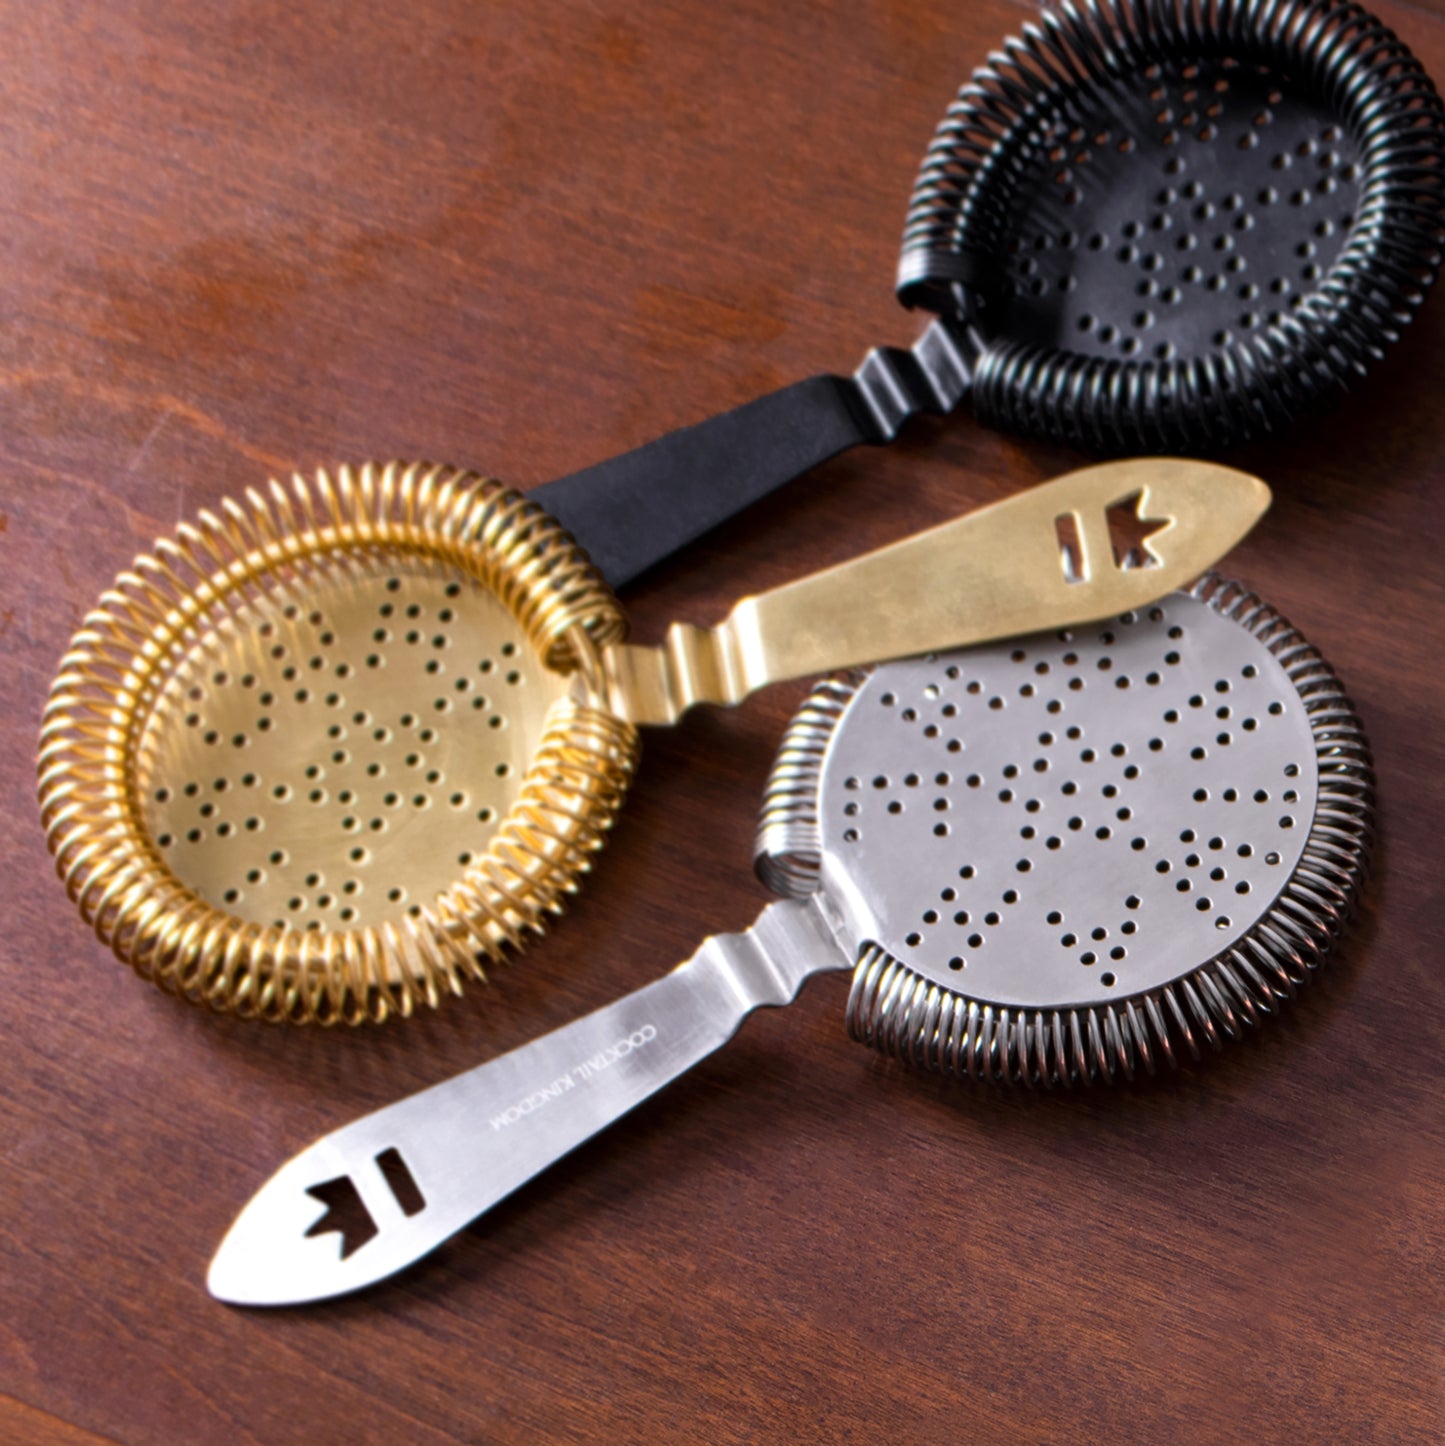 ANTIQUE-STYLE HAWTHORNE STRAINER / GOLD-PLATED